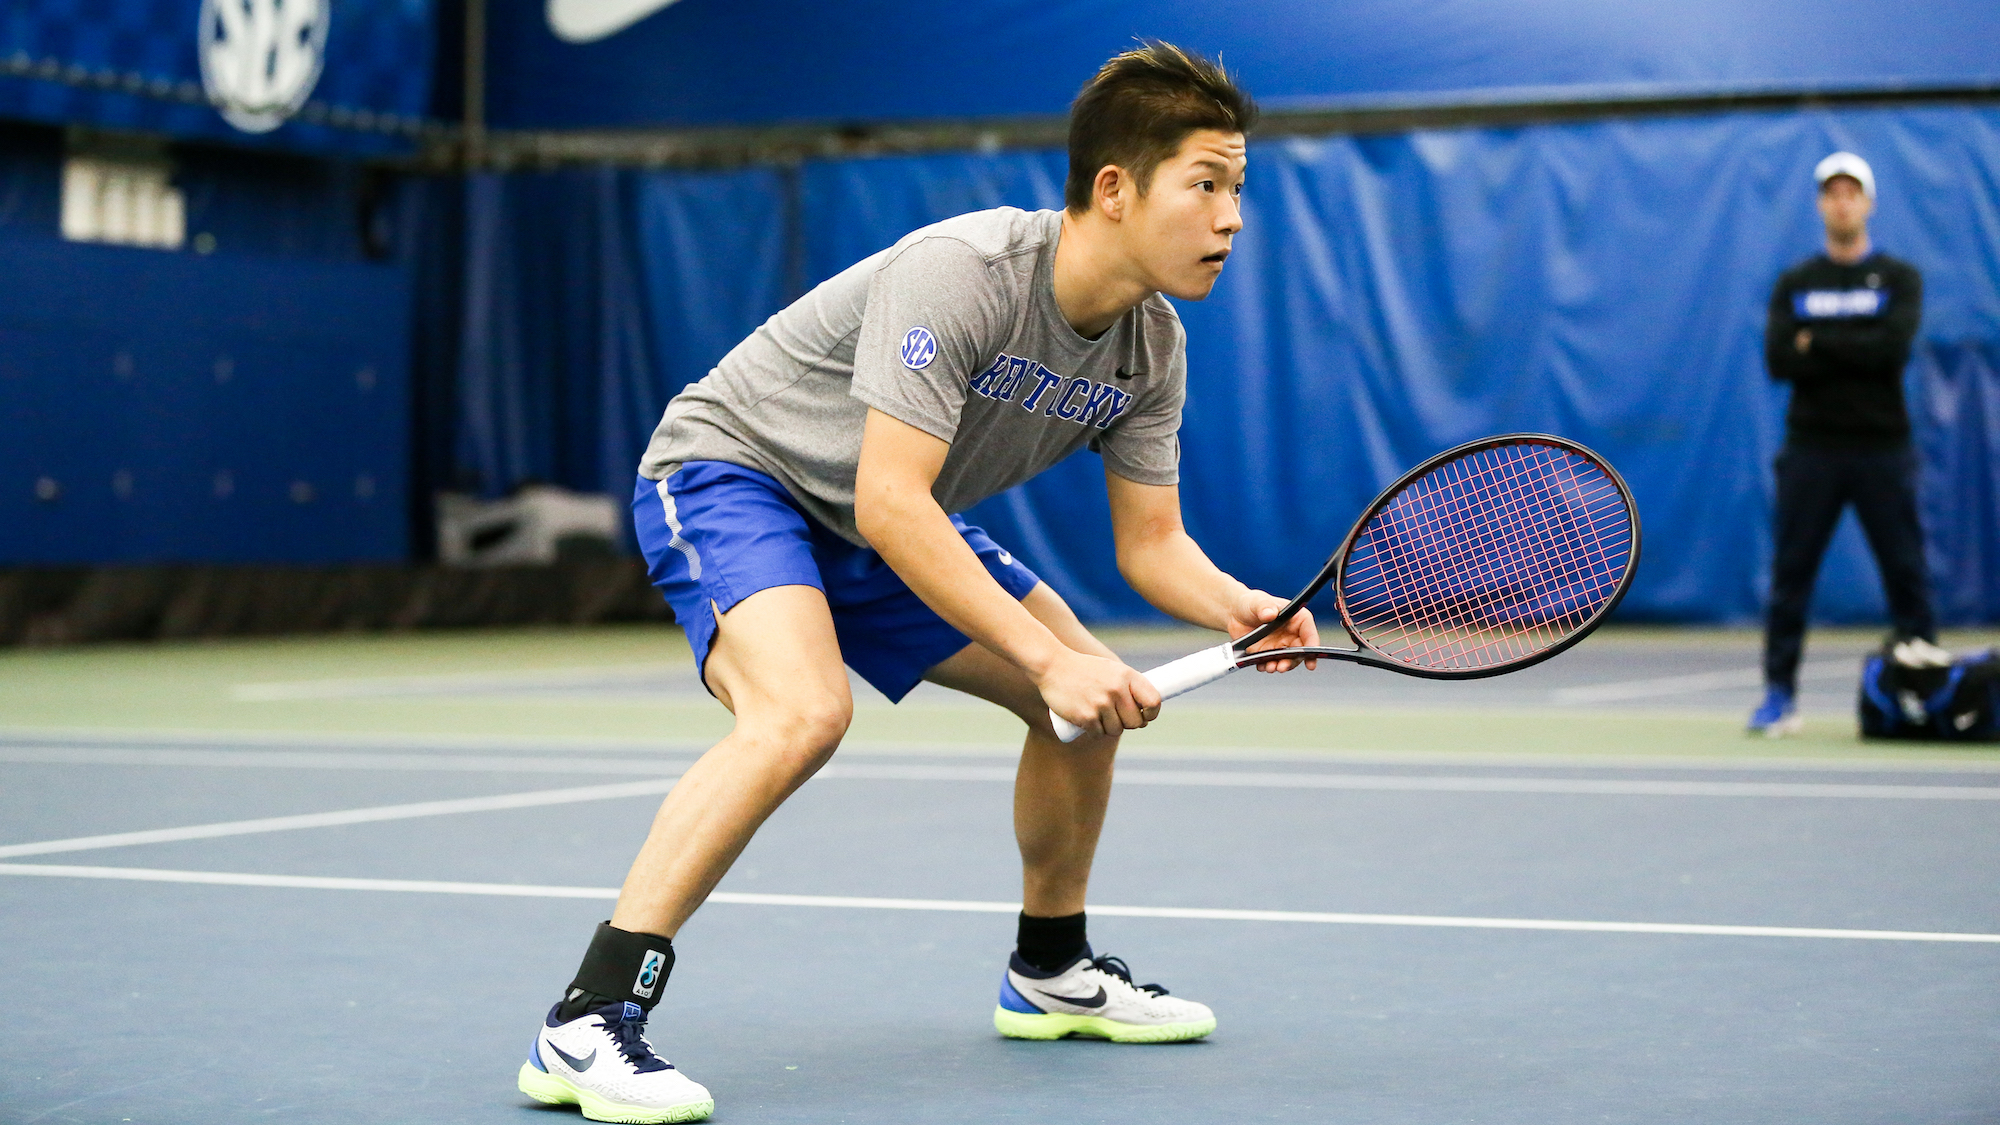 Strong Singles Play Guides Kentucky to 4-1 Victory Over Duke